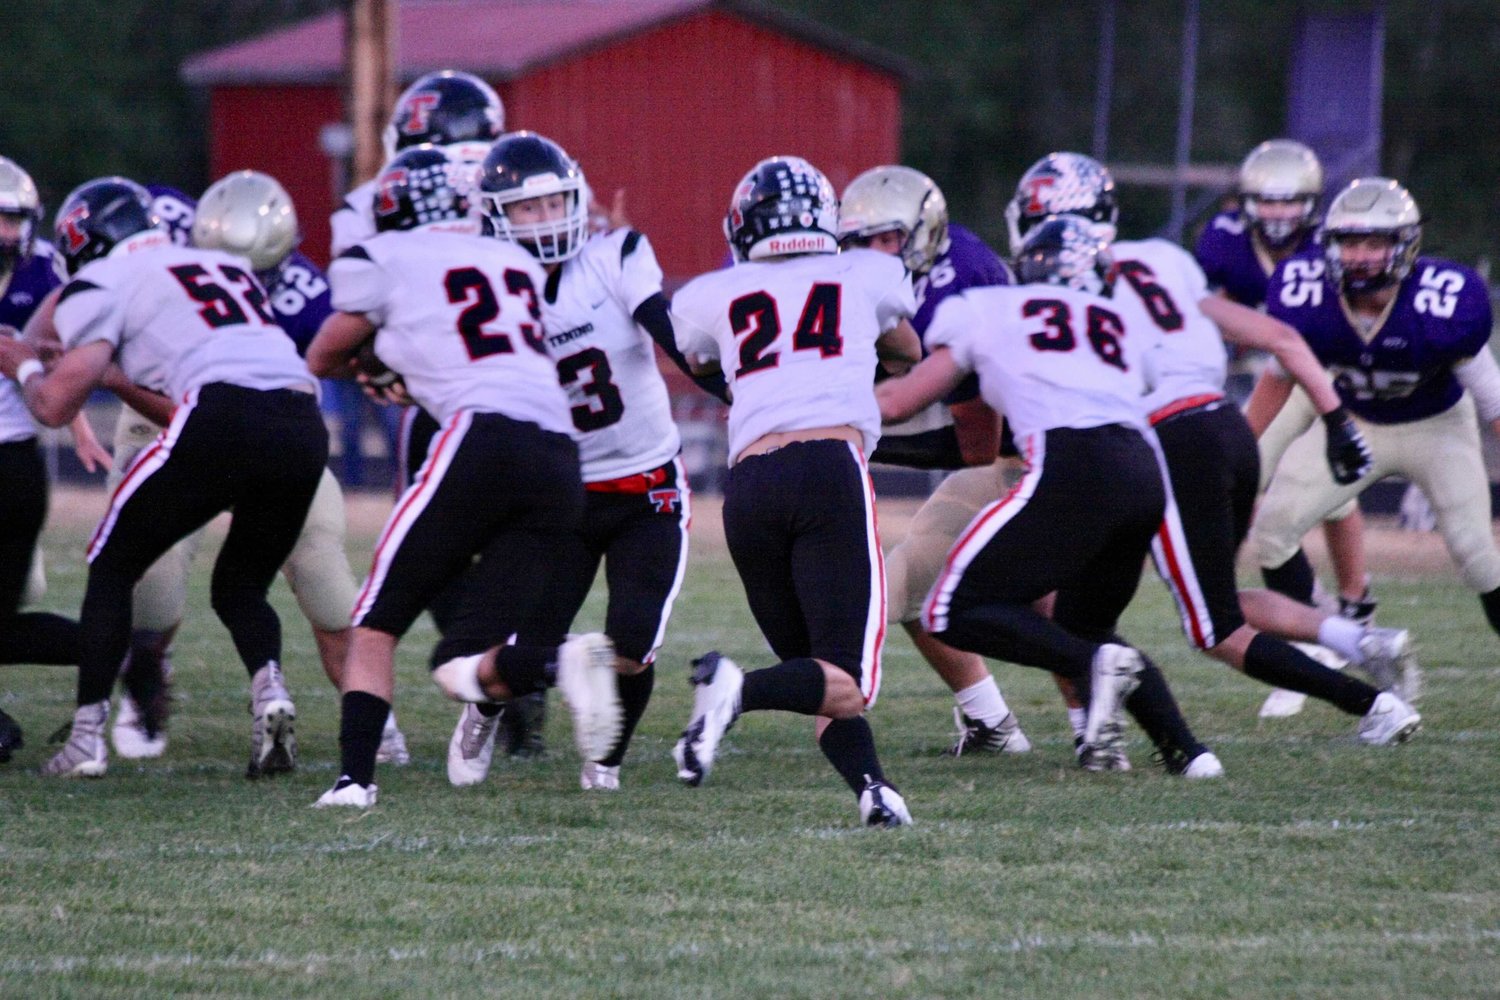 The Tenino offense operates during its 40-6 win at Onalaska on Sept. 23.